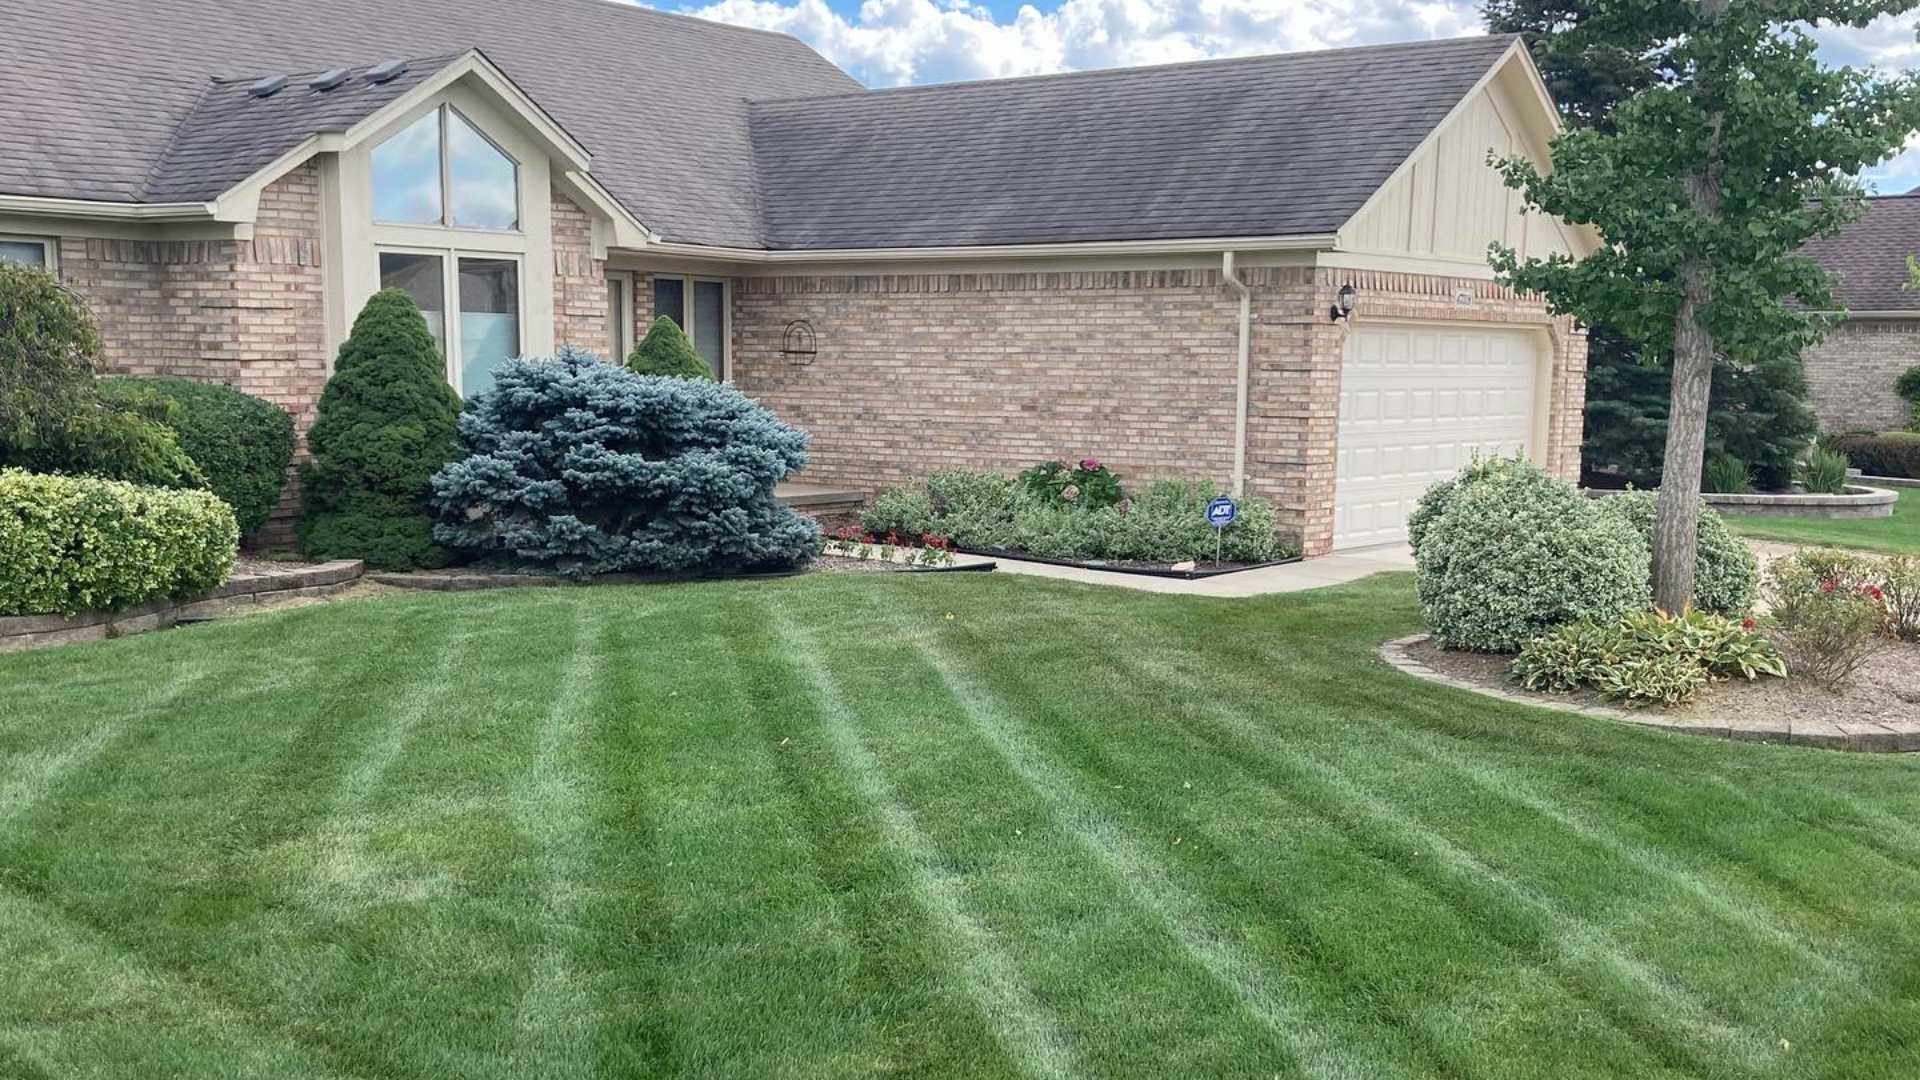 Homefront with landscaping and lawn maintained in Eastpointe, MI.